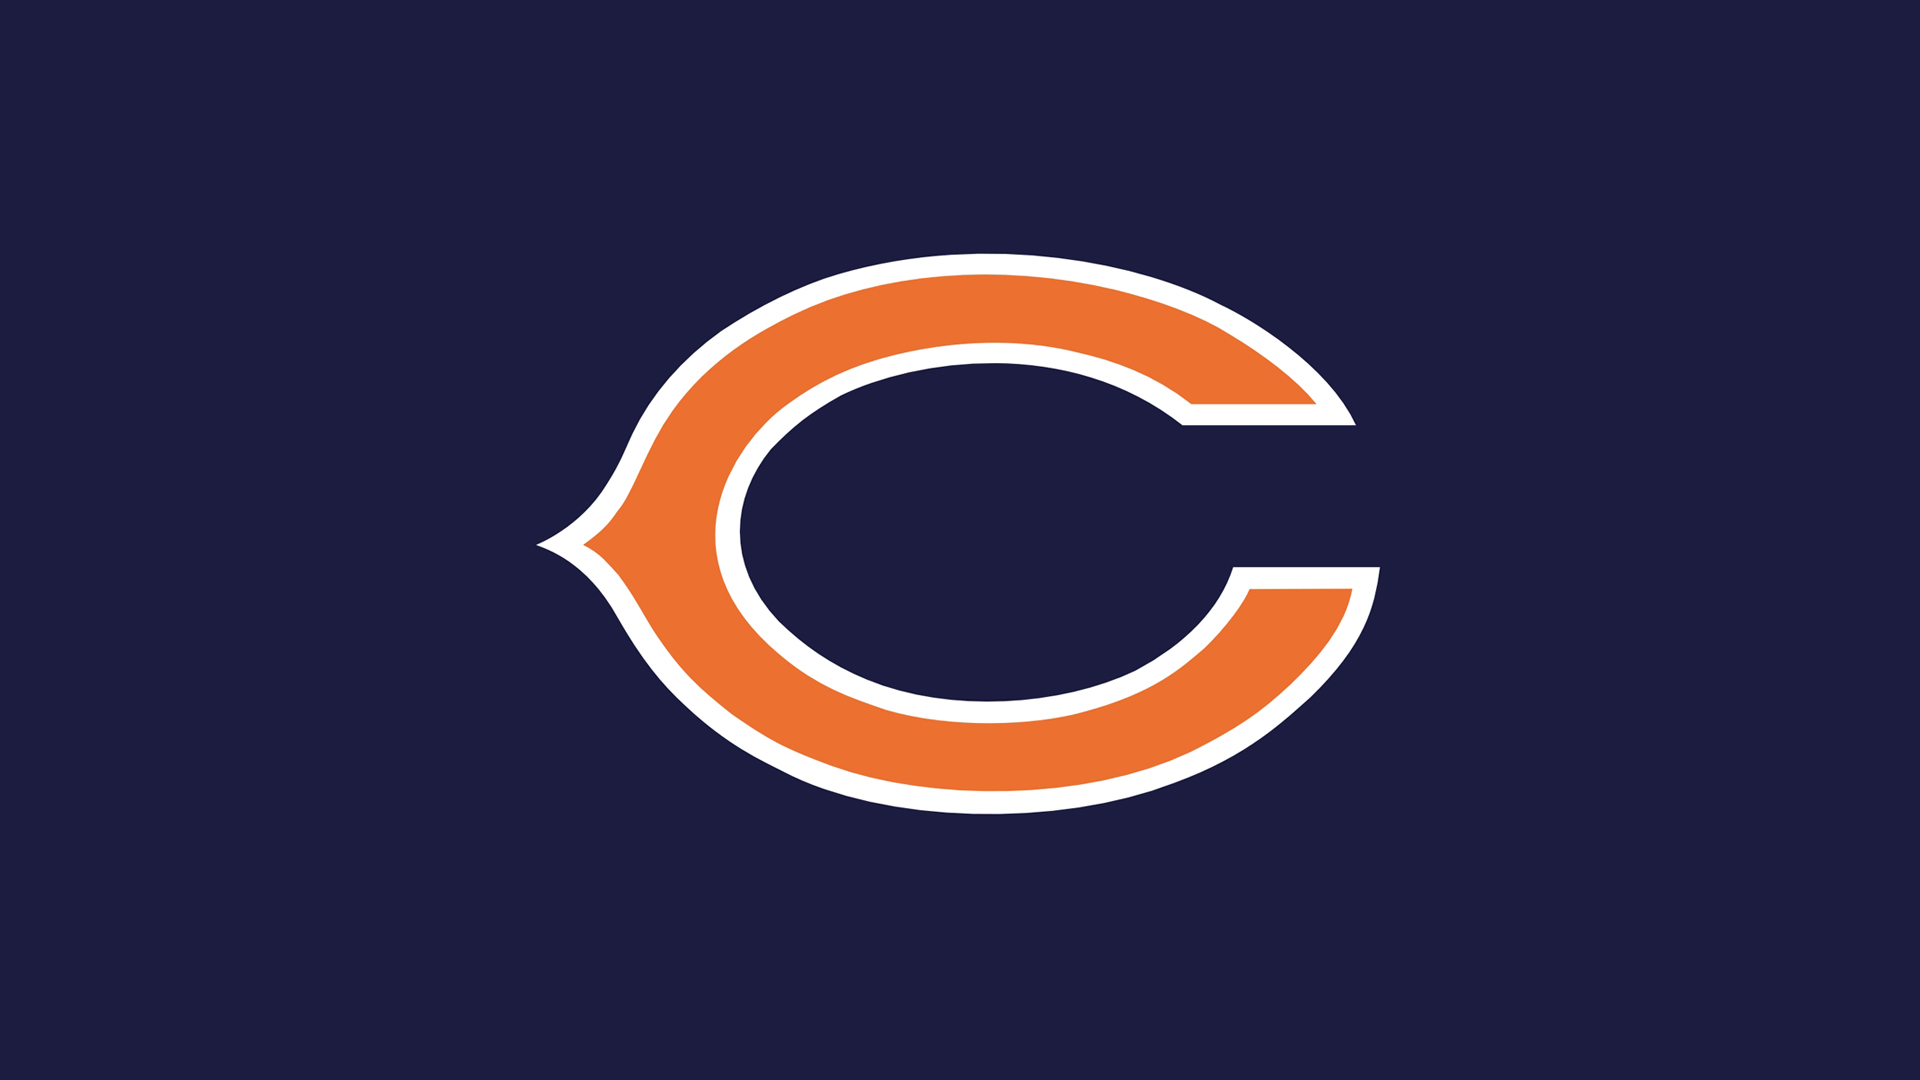 Bears Bounce Back After Three-Game Skid